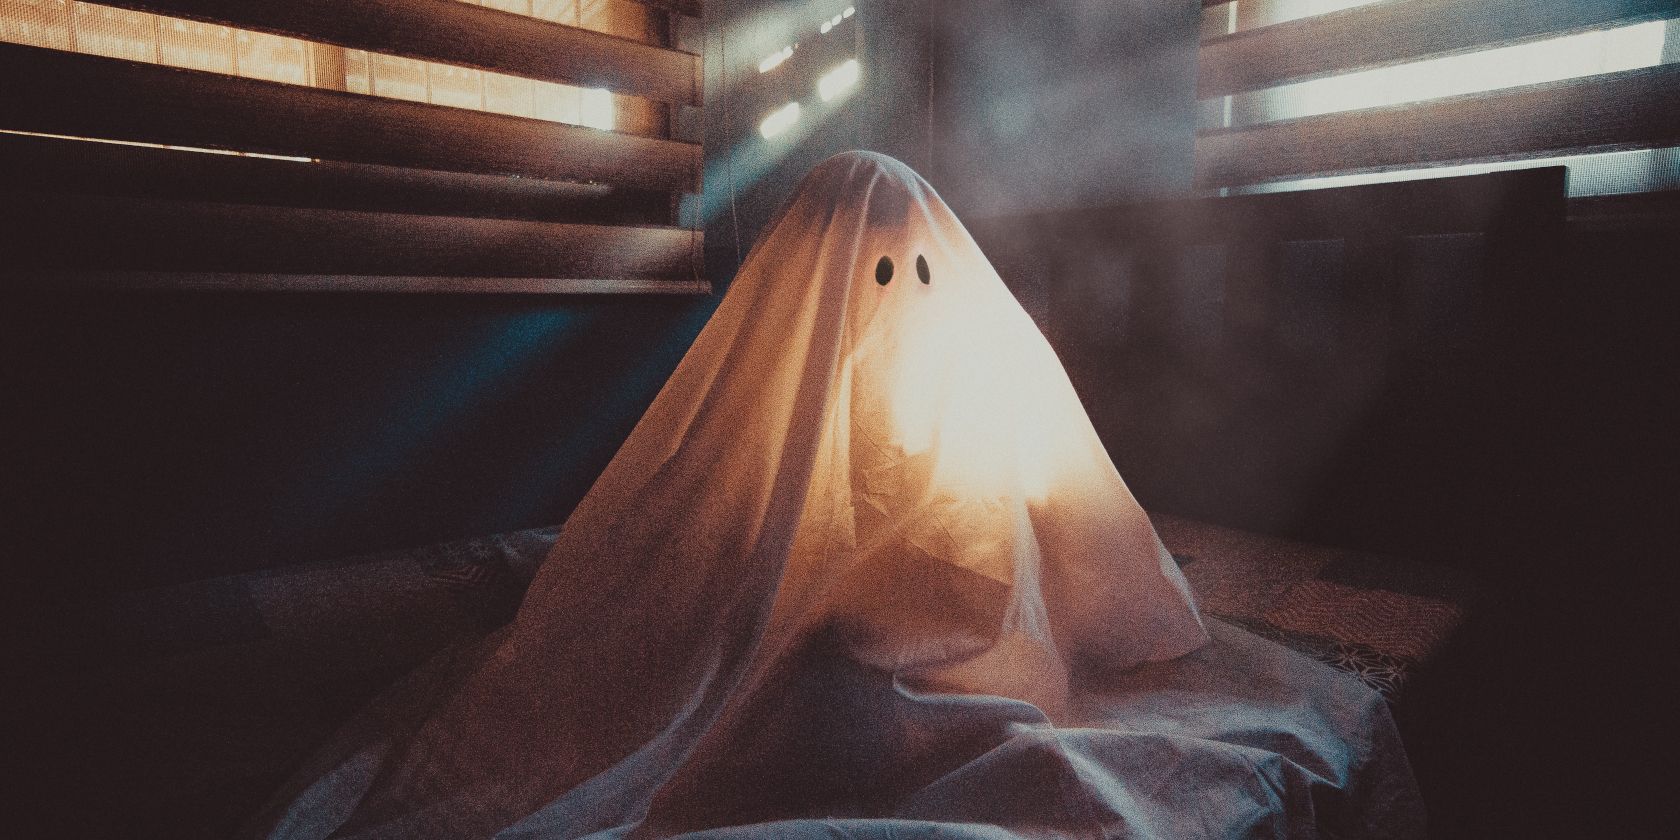 grainy image of a spooky ghost which is really a person under a blanket